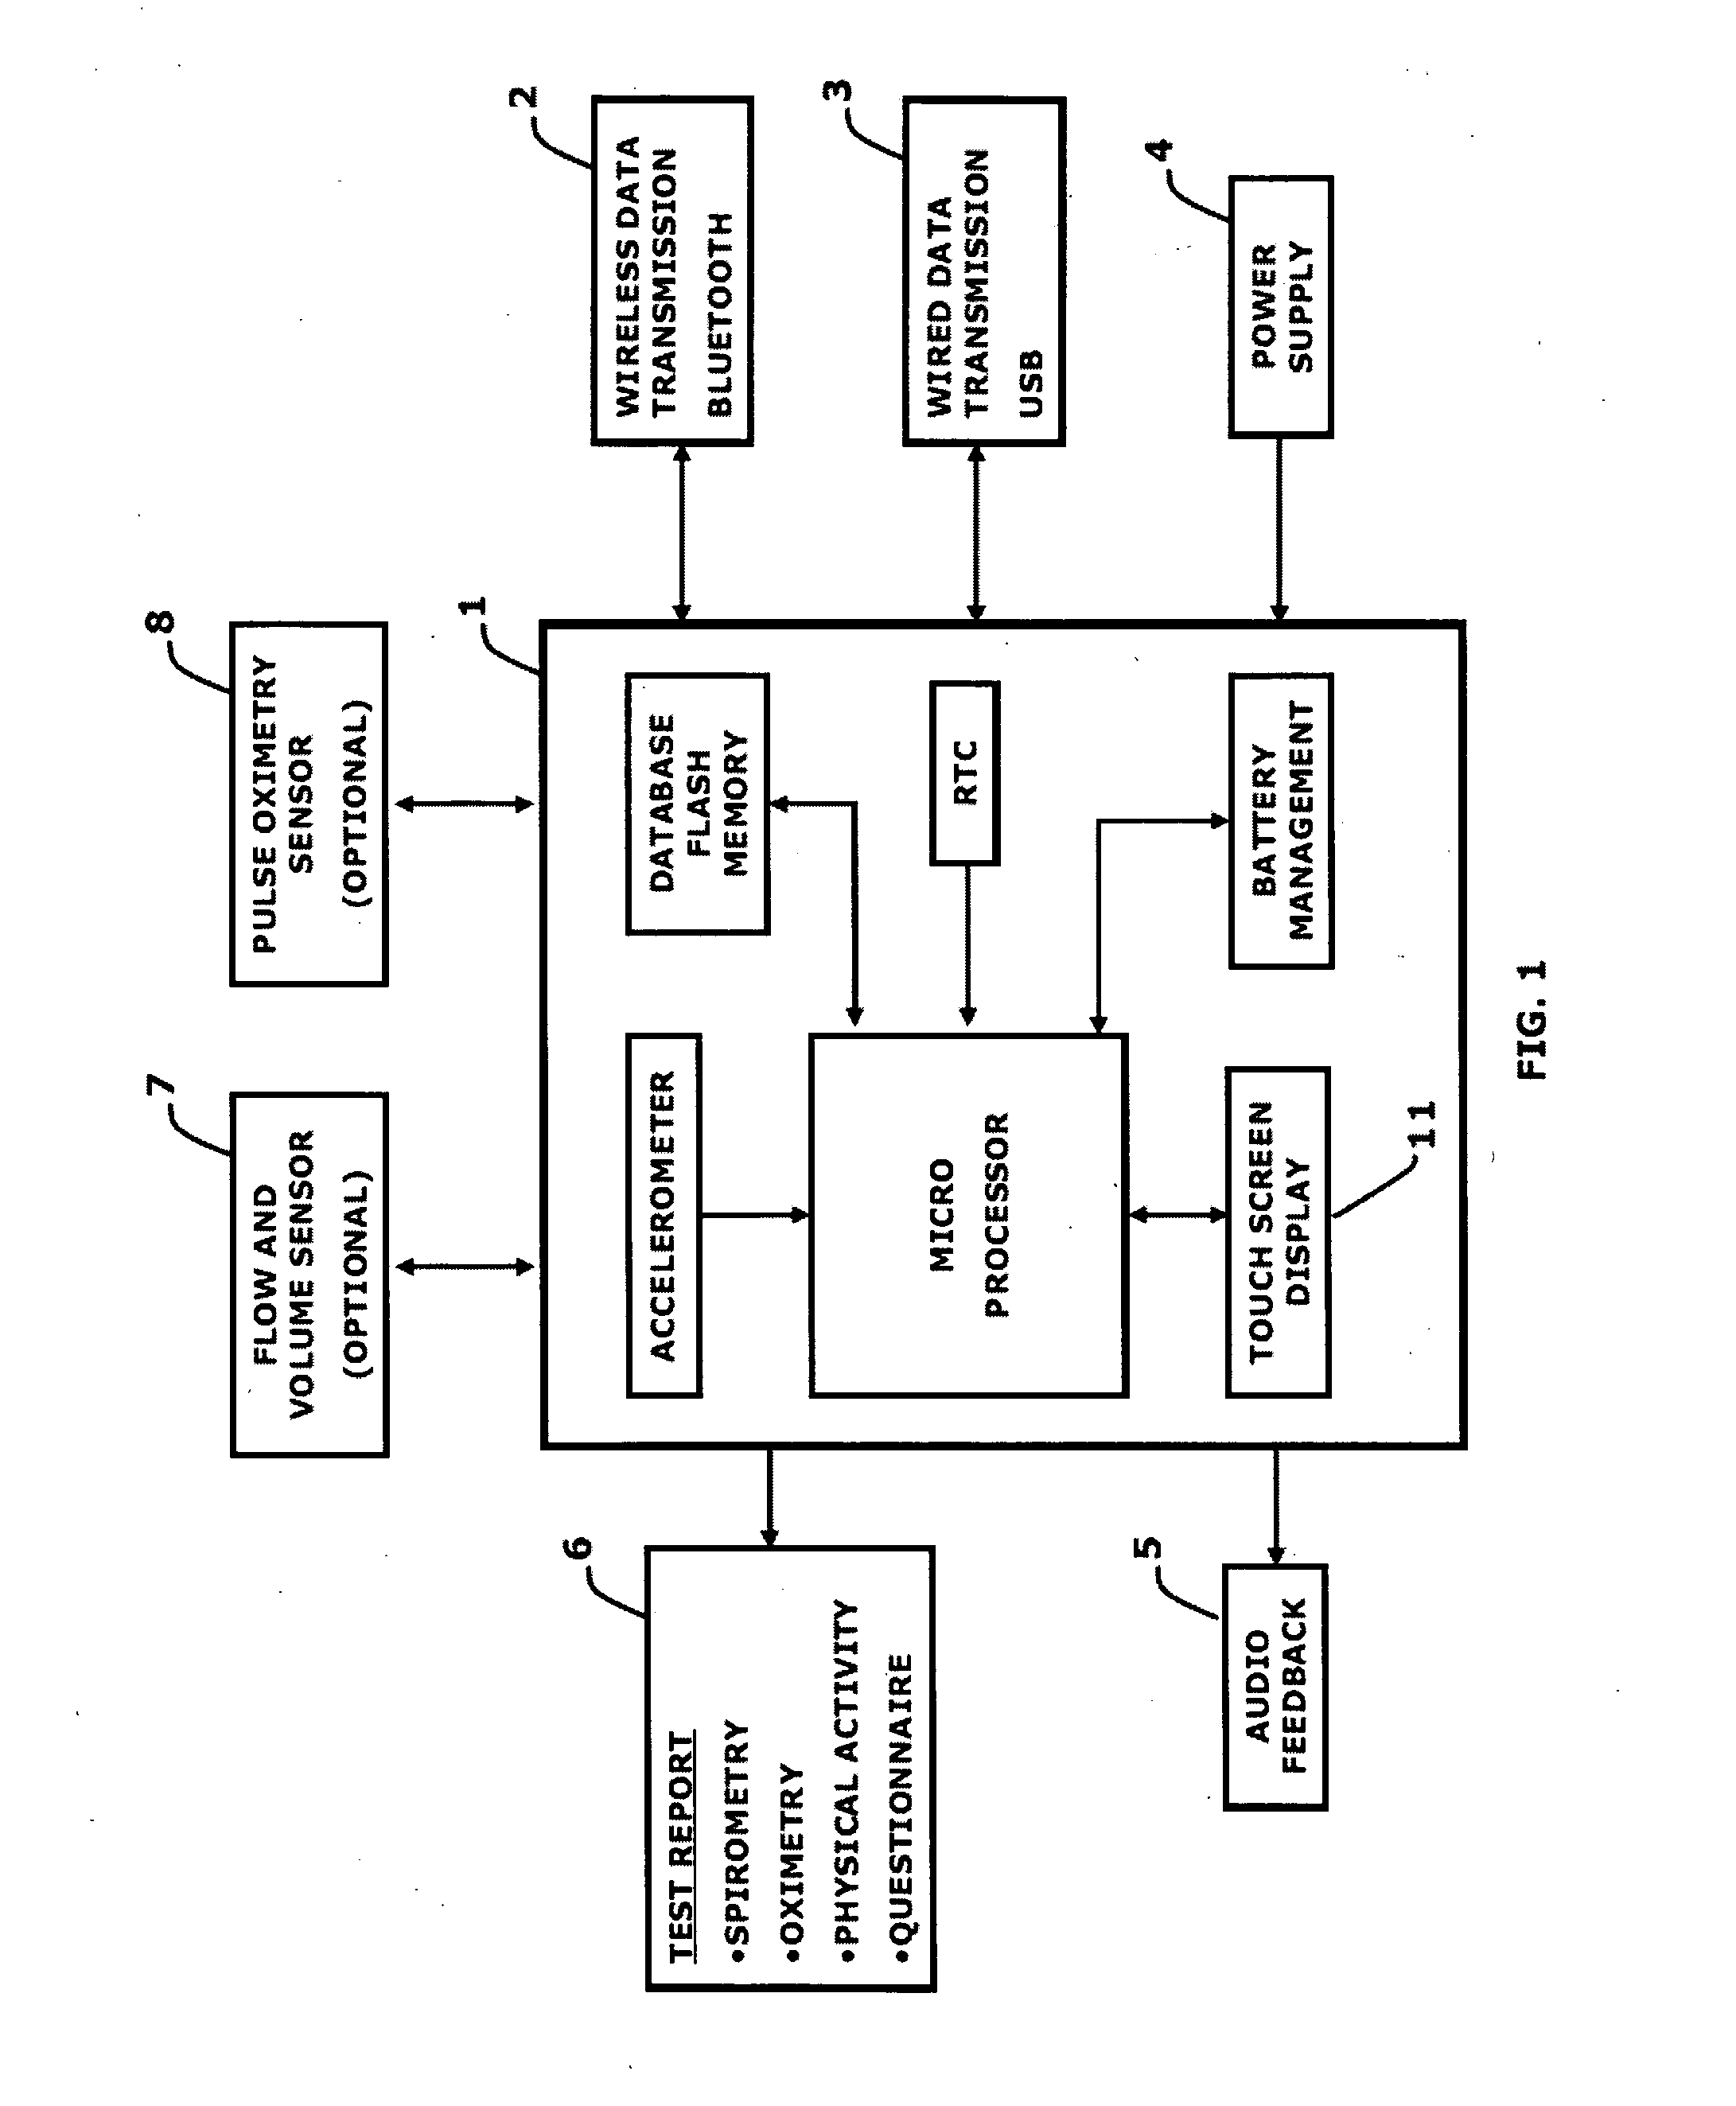 Portable device for monitoring and reporting of medical information for the evidence -based management of patients with chronic respiratory disease